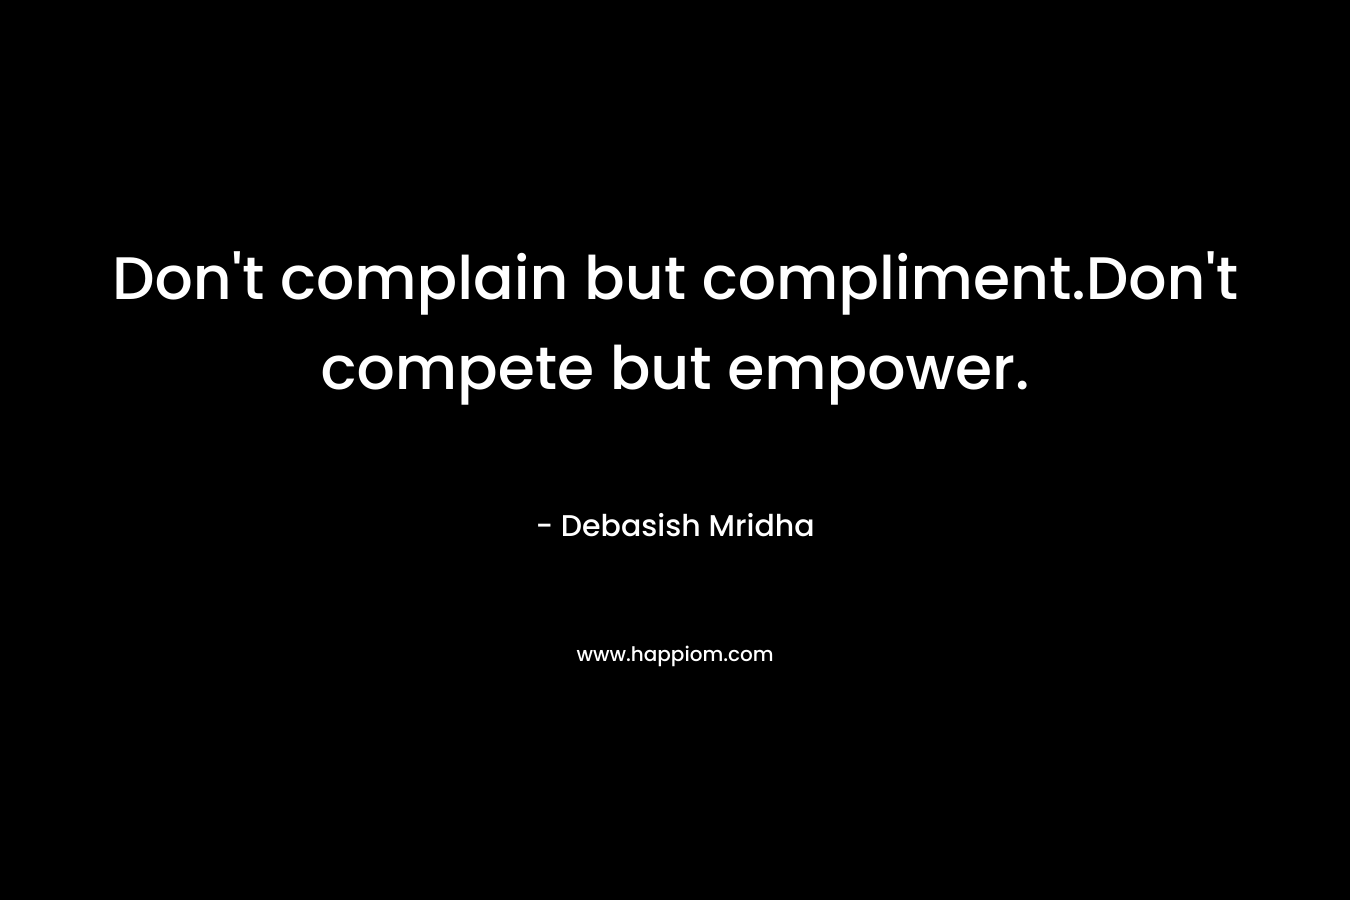 Don't complain but compliment.Don't compete but empower.